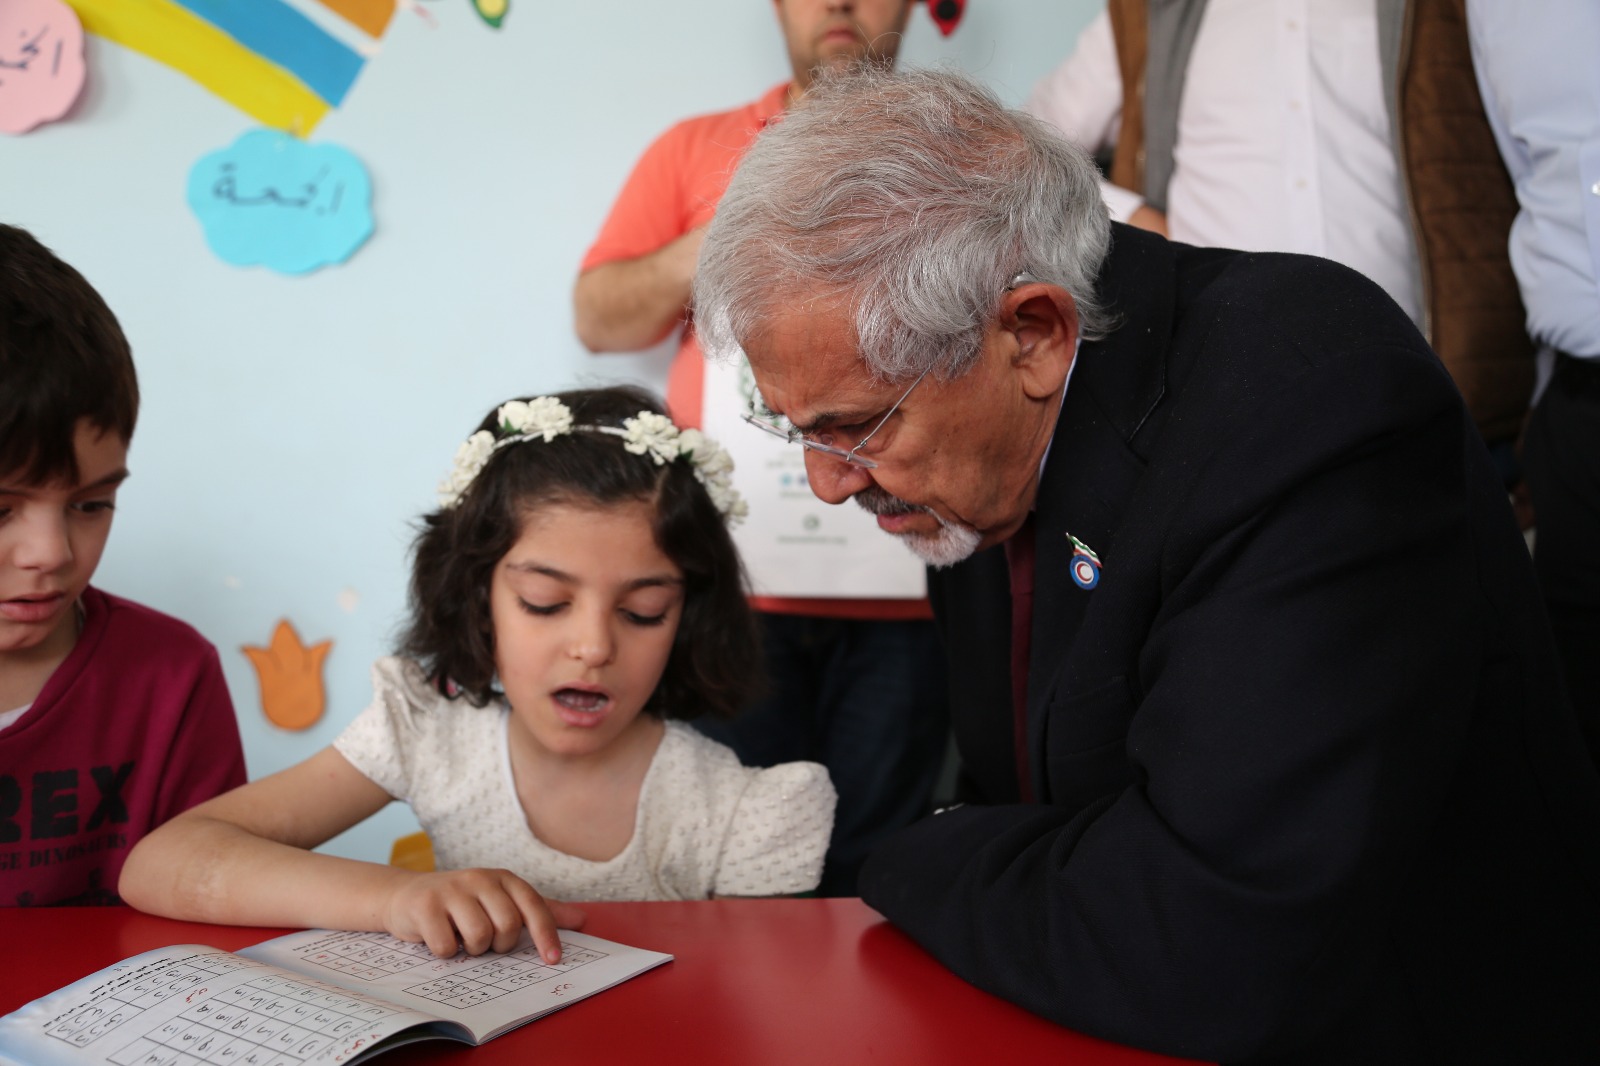 The Kuwait Red Crescent Society (KRCS) opened a multipurpose project for Syrian orphan refugees in Gaziantep city